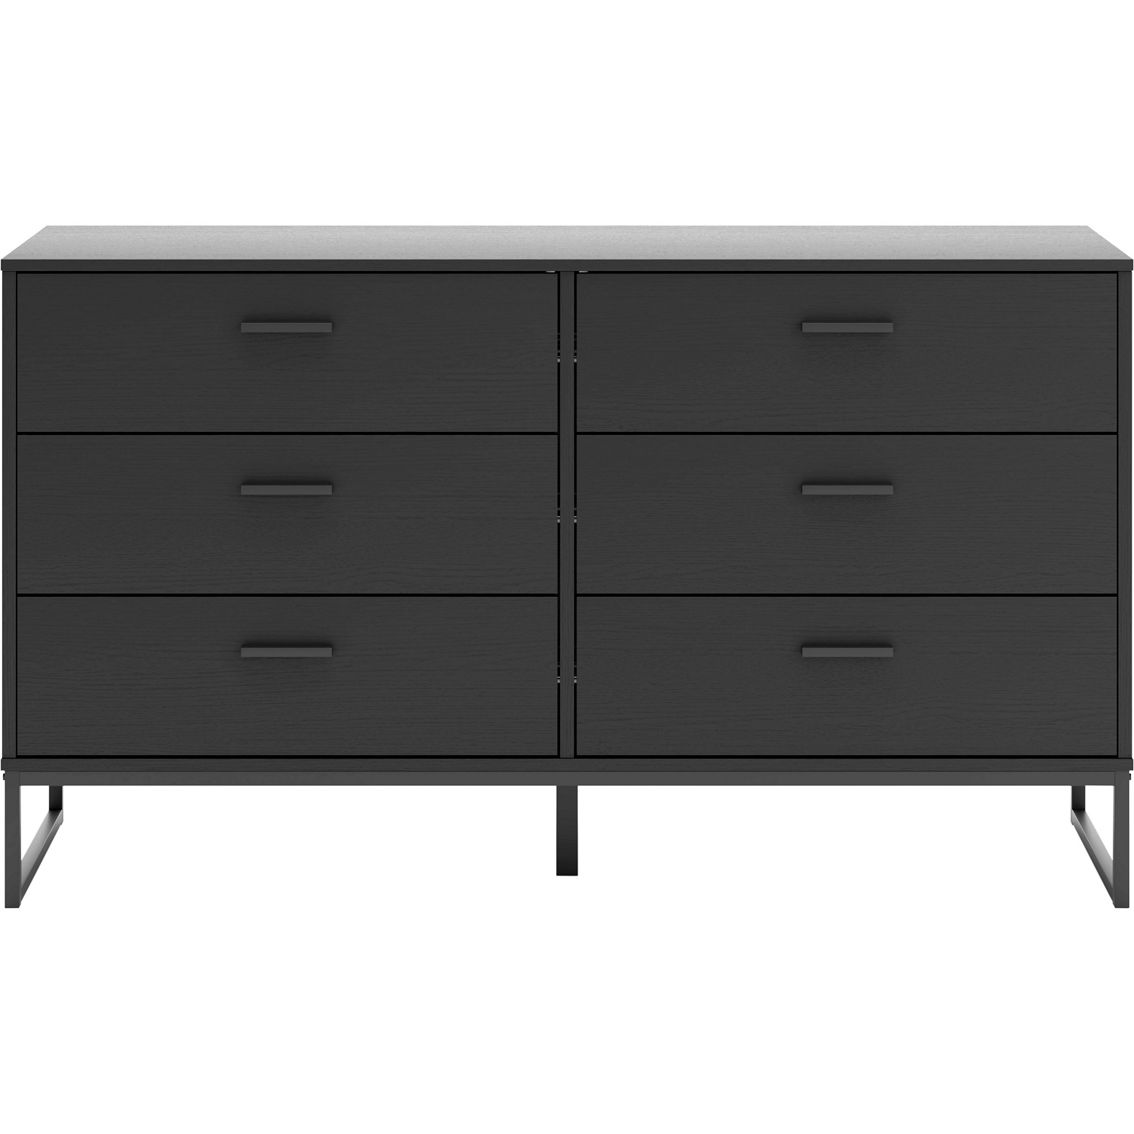 Signature Design by Ashley Socalle Ready-to-Assemble Dresser - Image 2 of 8